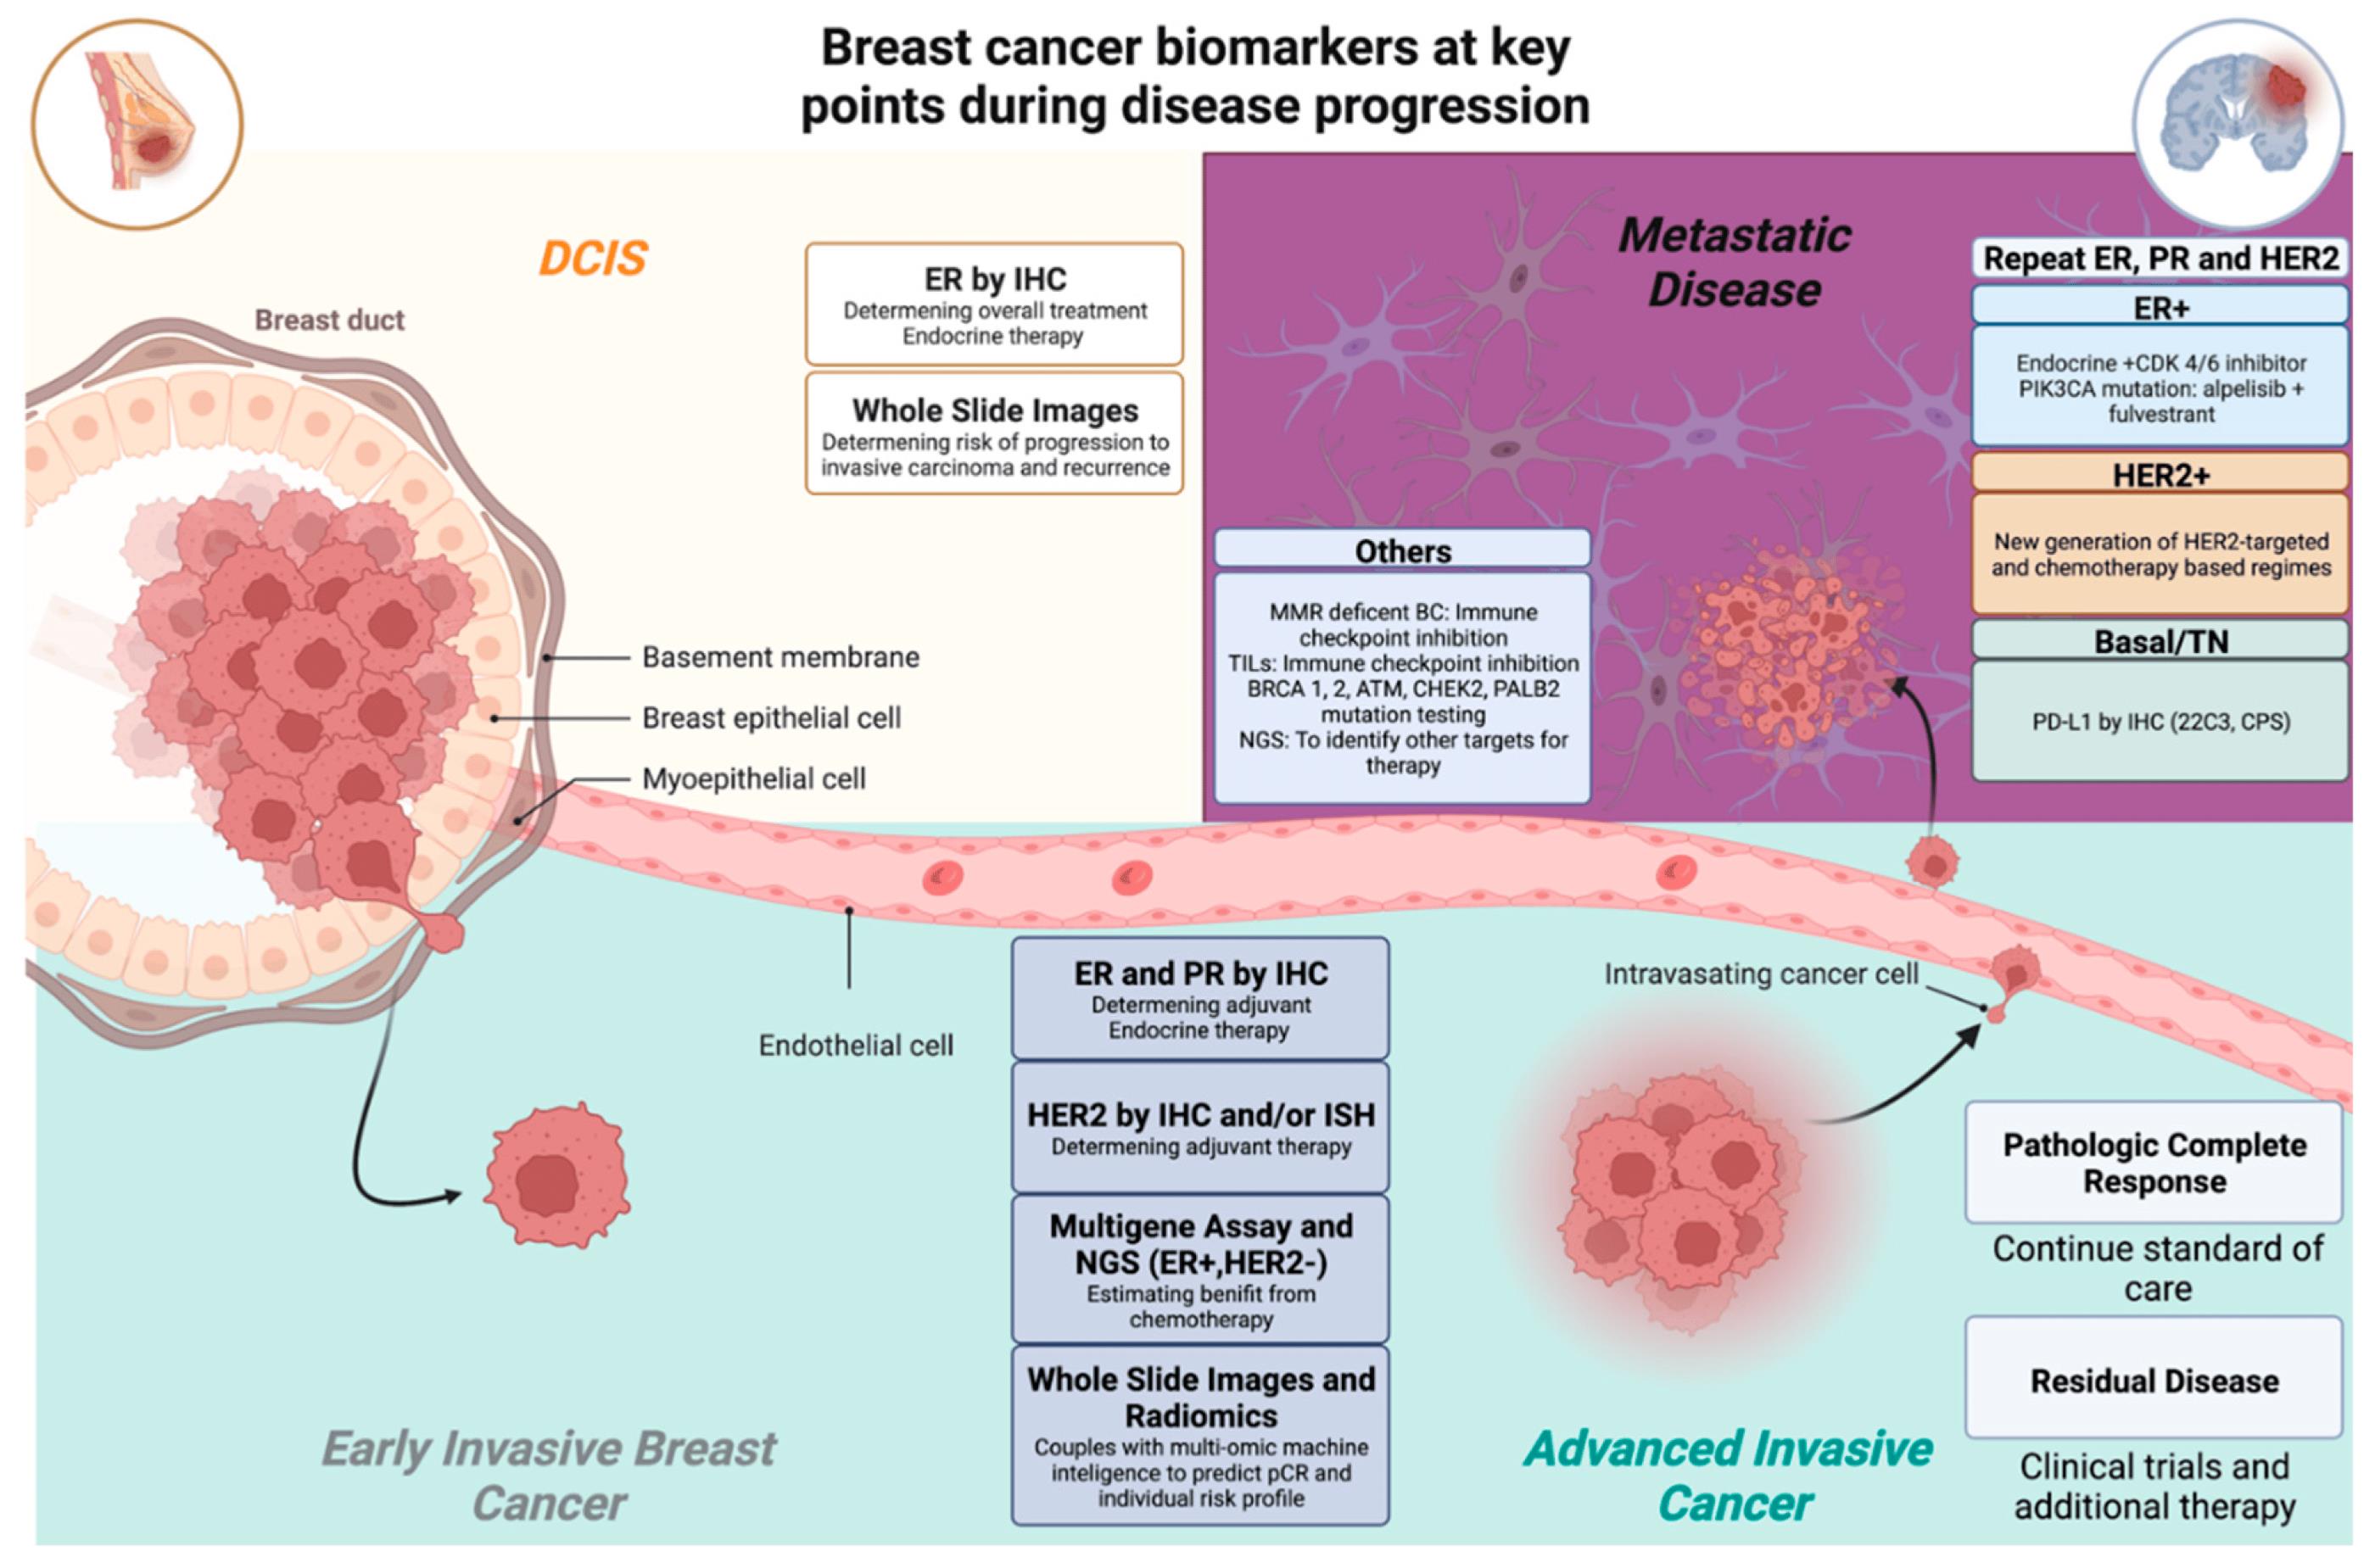 Breast cancer biomarkers at key points during disease progression